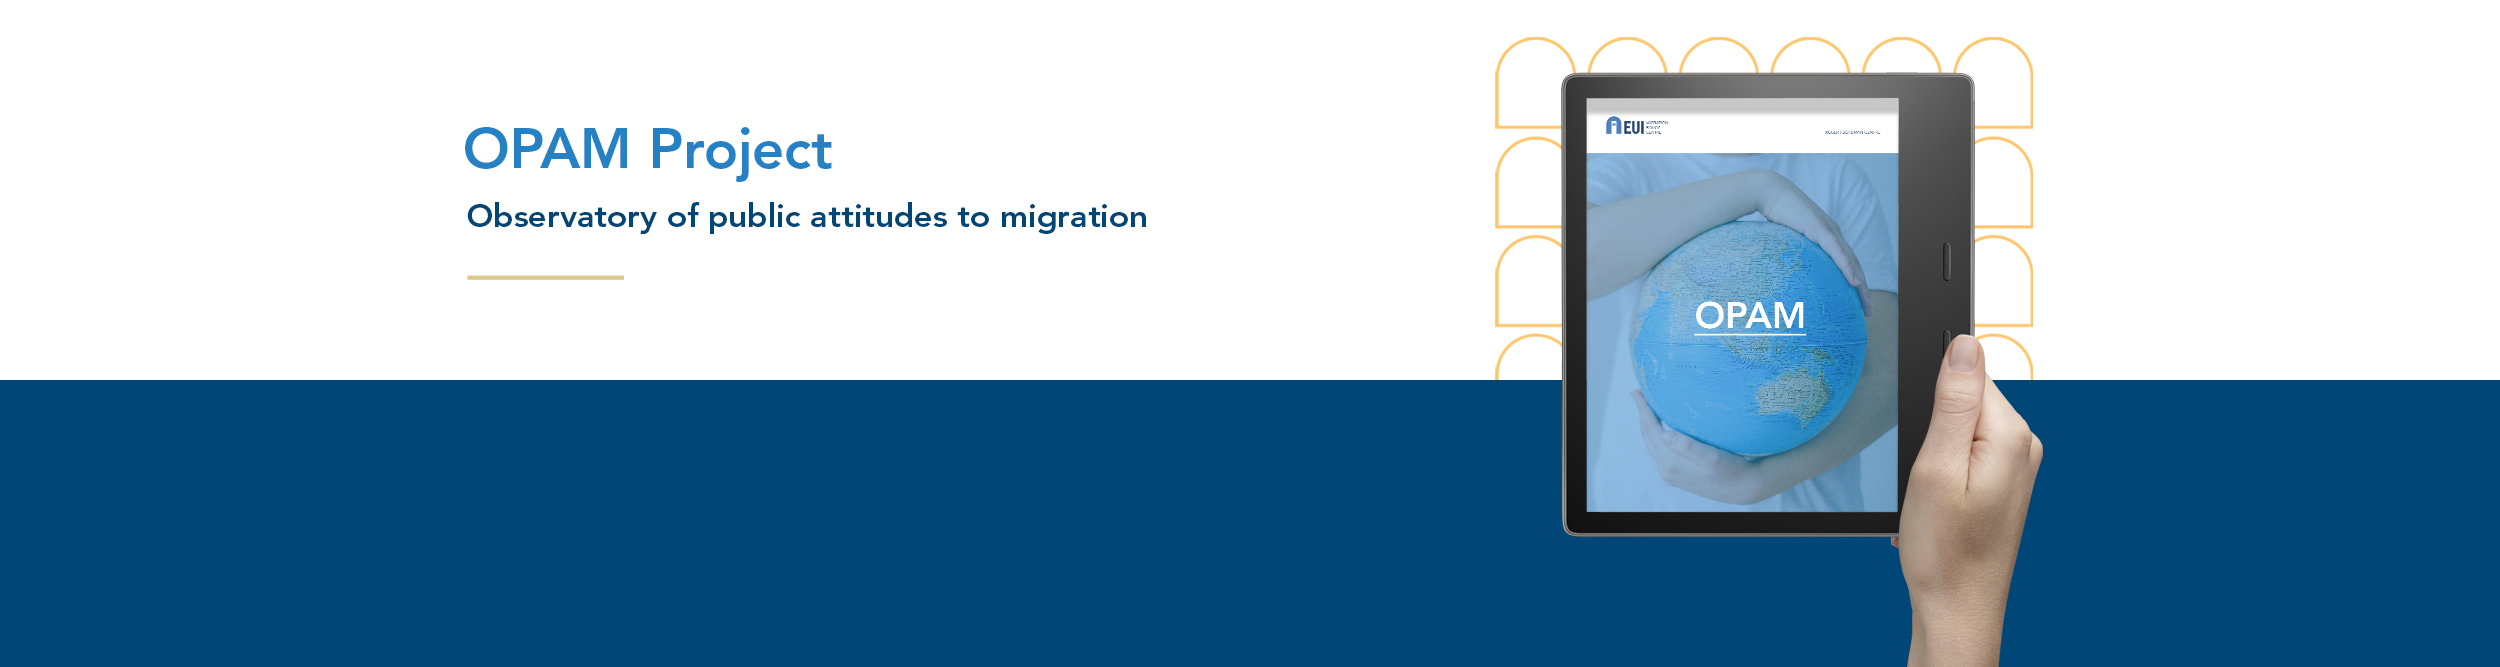 Permalink to:We have renewed our OPAM project’s resources on public attitudes to migration!